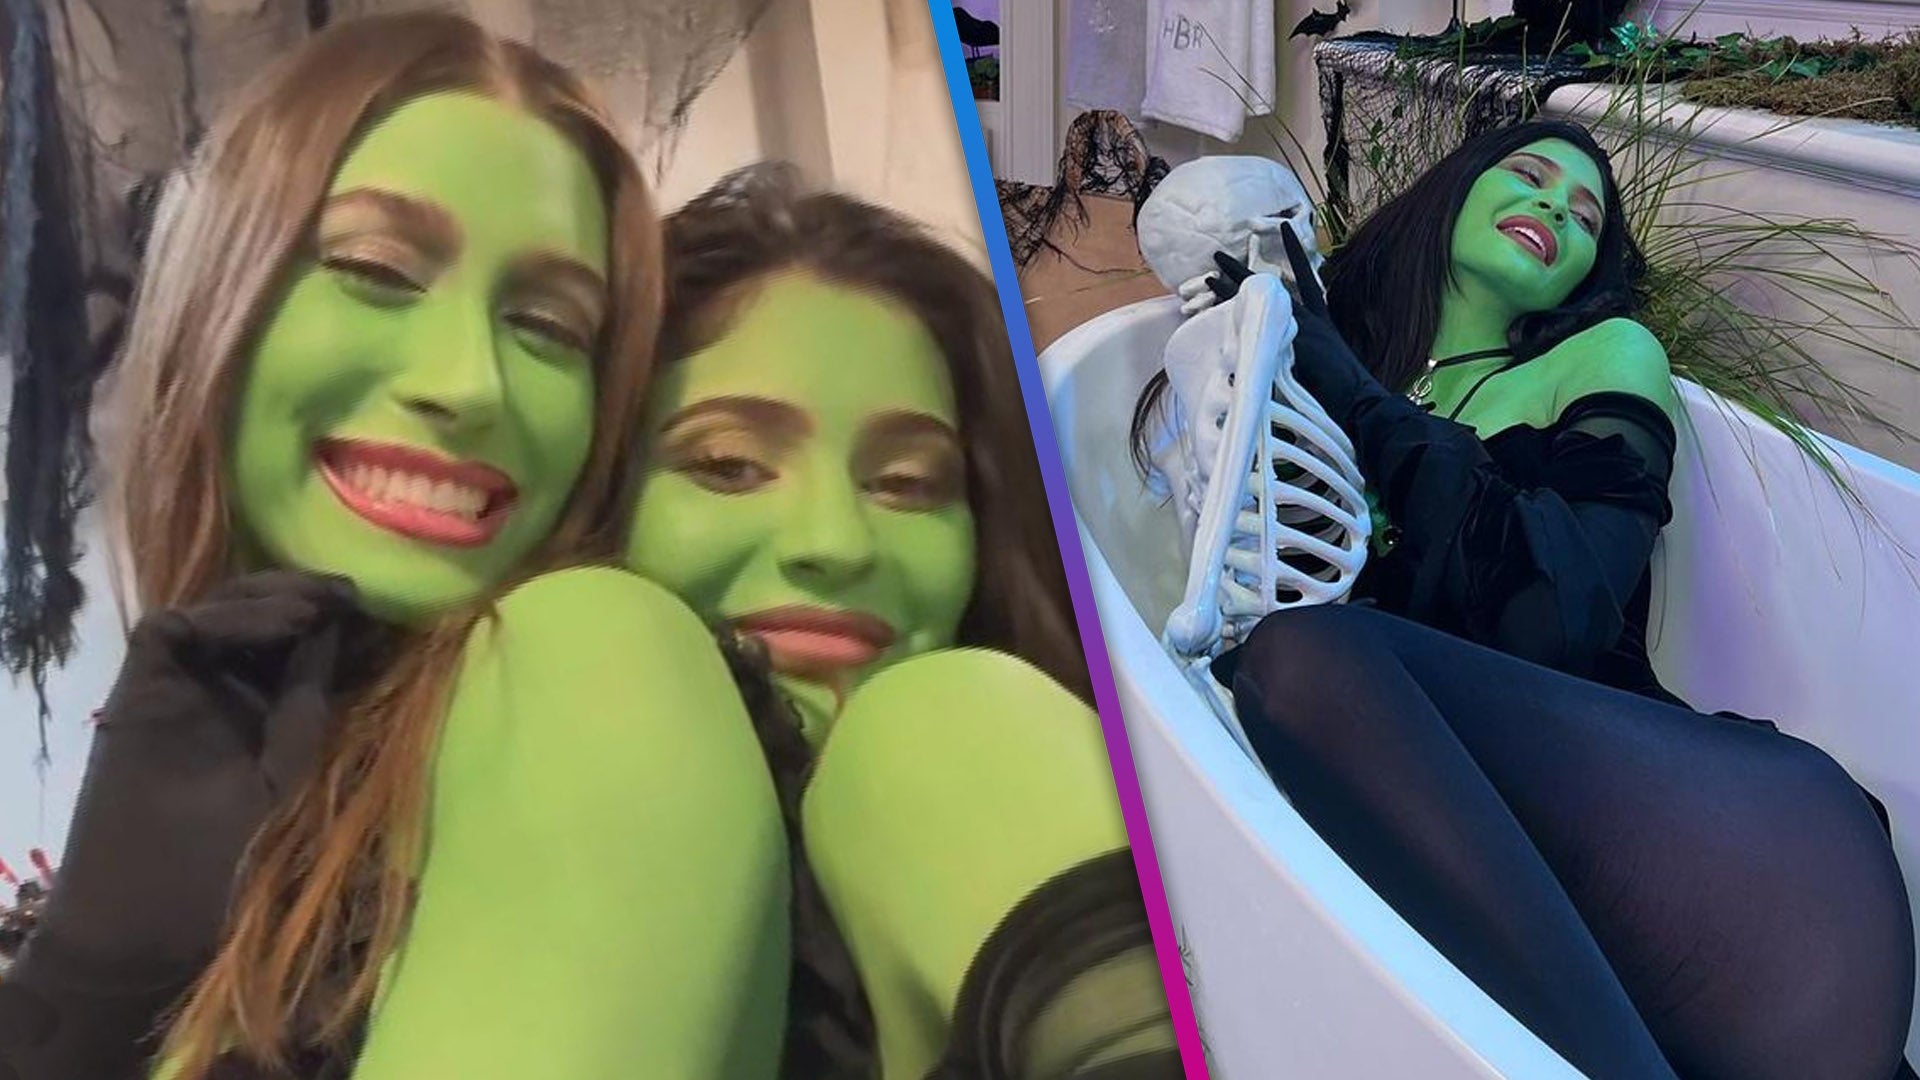 Kylie Jenner and Hailey Bieber Go on Wacky Adventure in Full Green